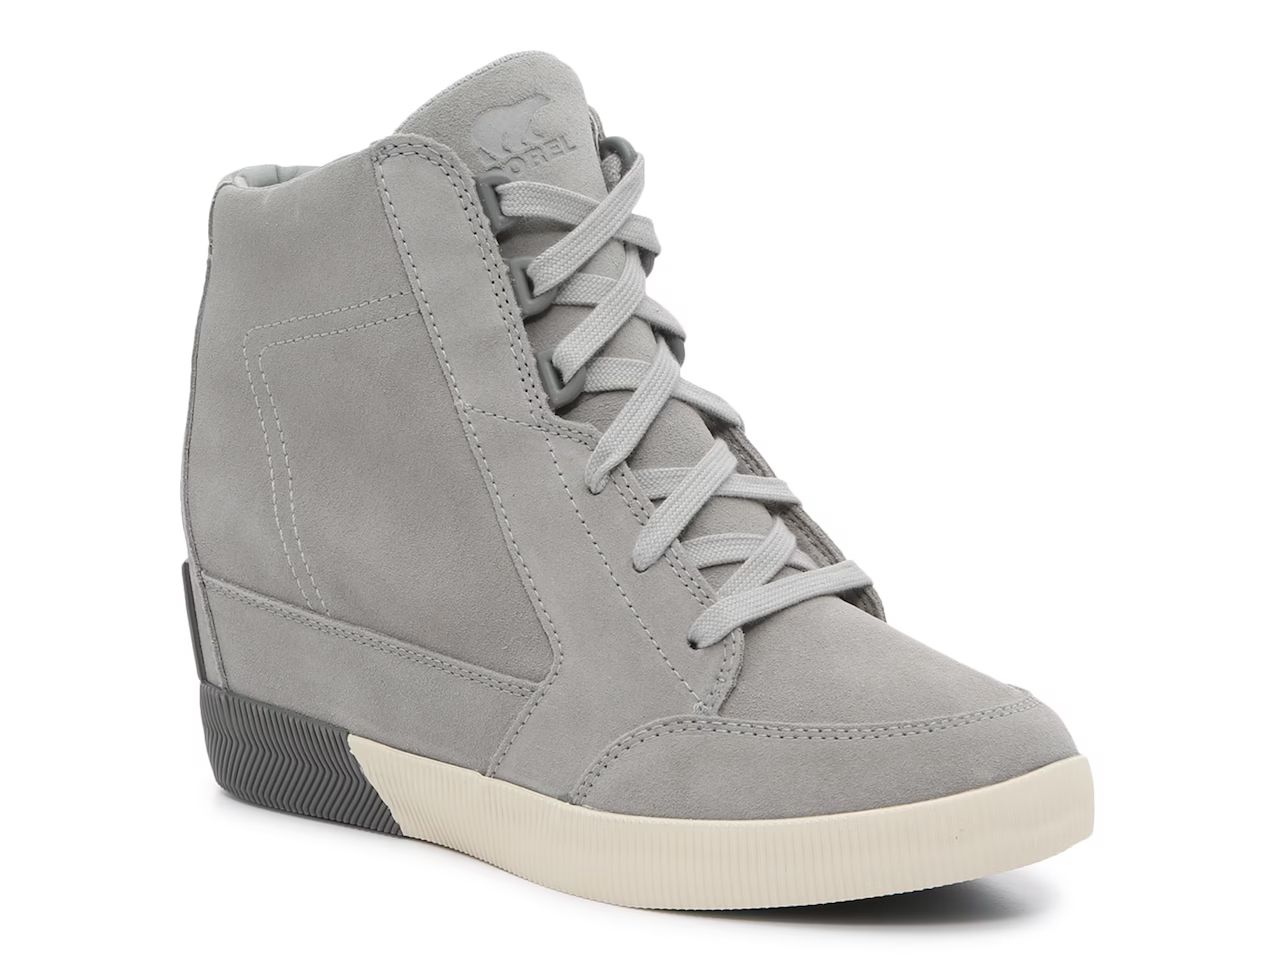 Sorel Out N About Wedge Sneaker | DSW